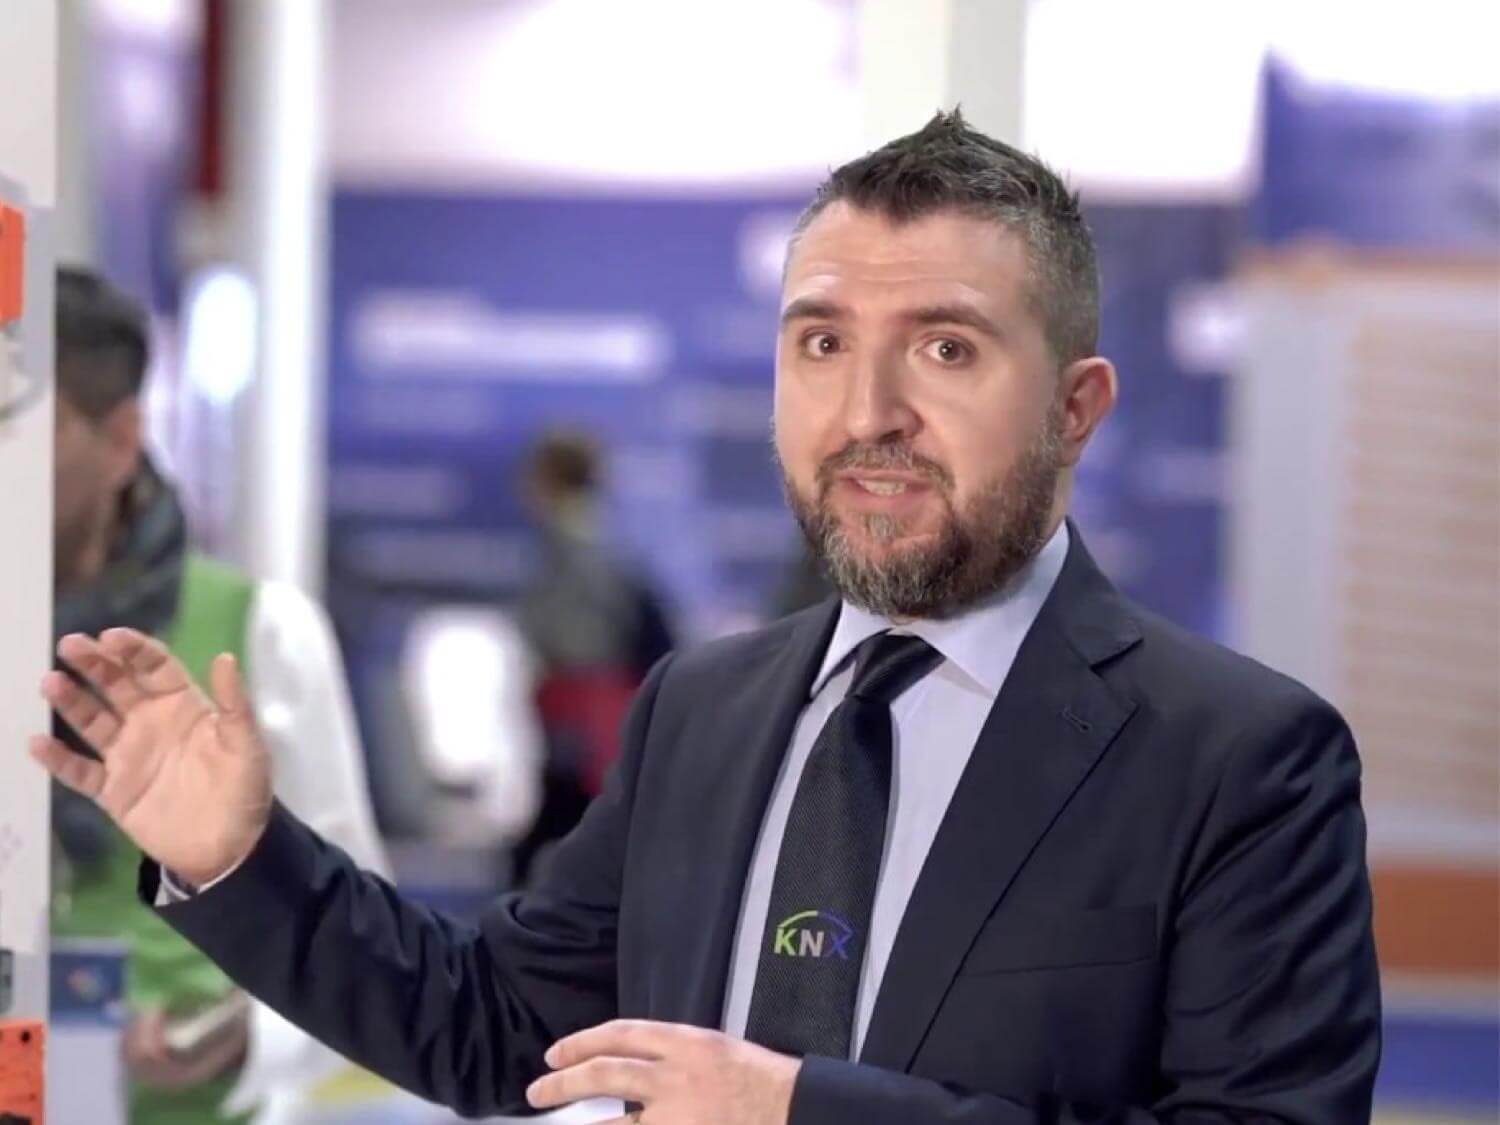 Alessio Vannuzzi talks about his experience with Easykon for KNX